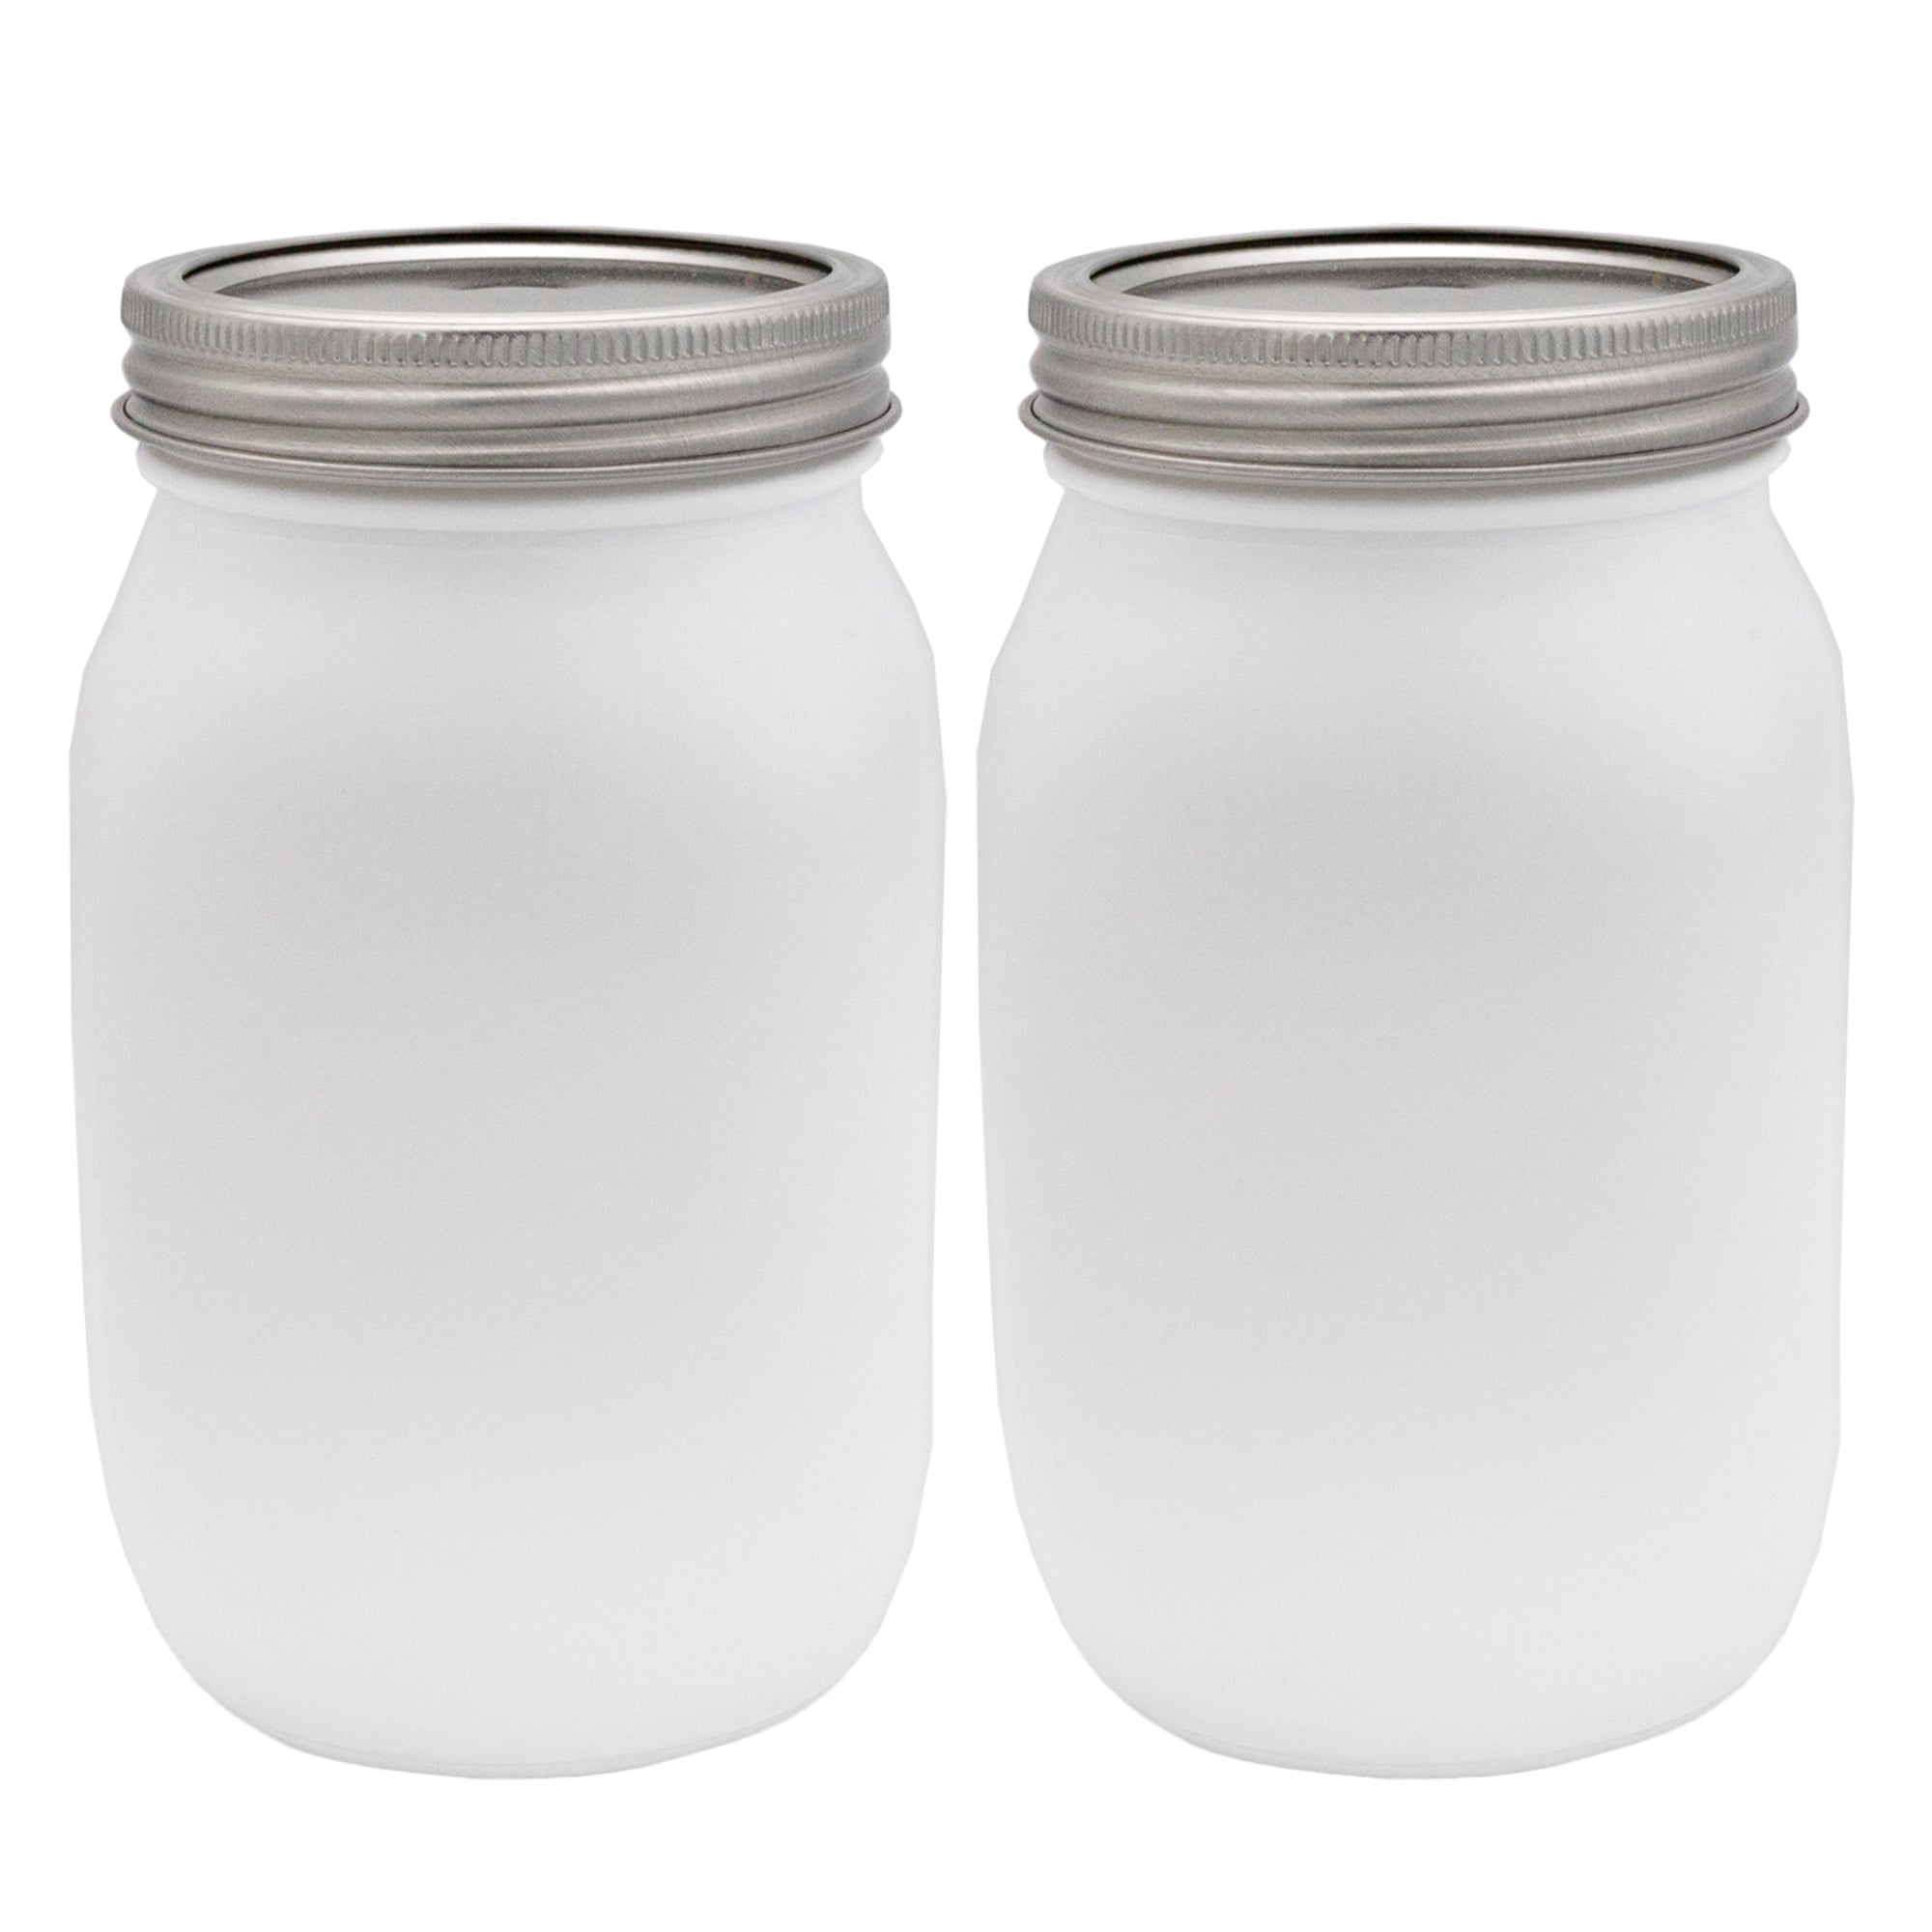 16oz Glass Mason Jars with Lids Set of 12- Wide Mouth - Airtight Band + Marker 